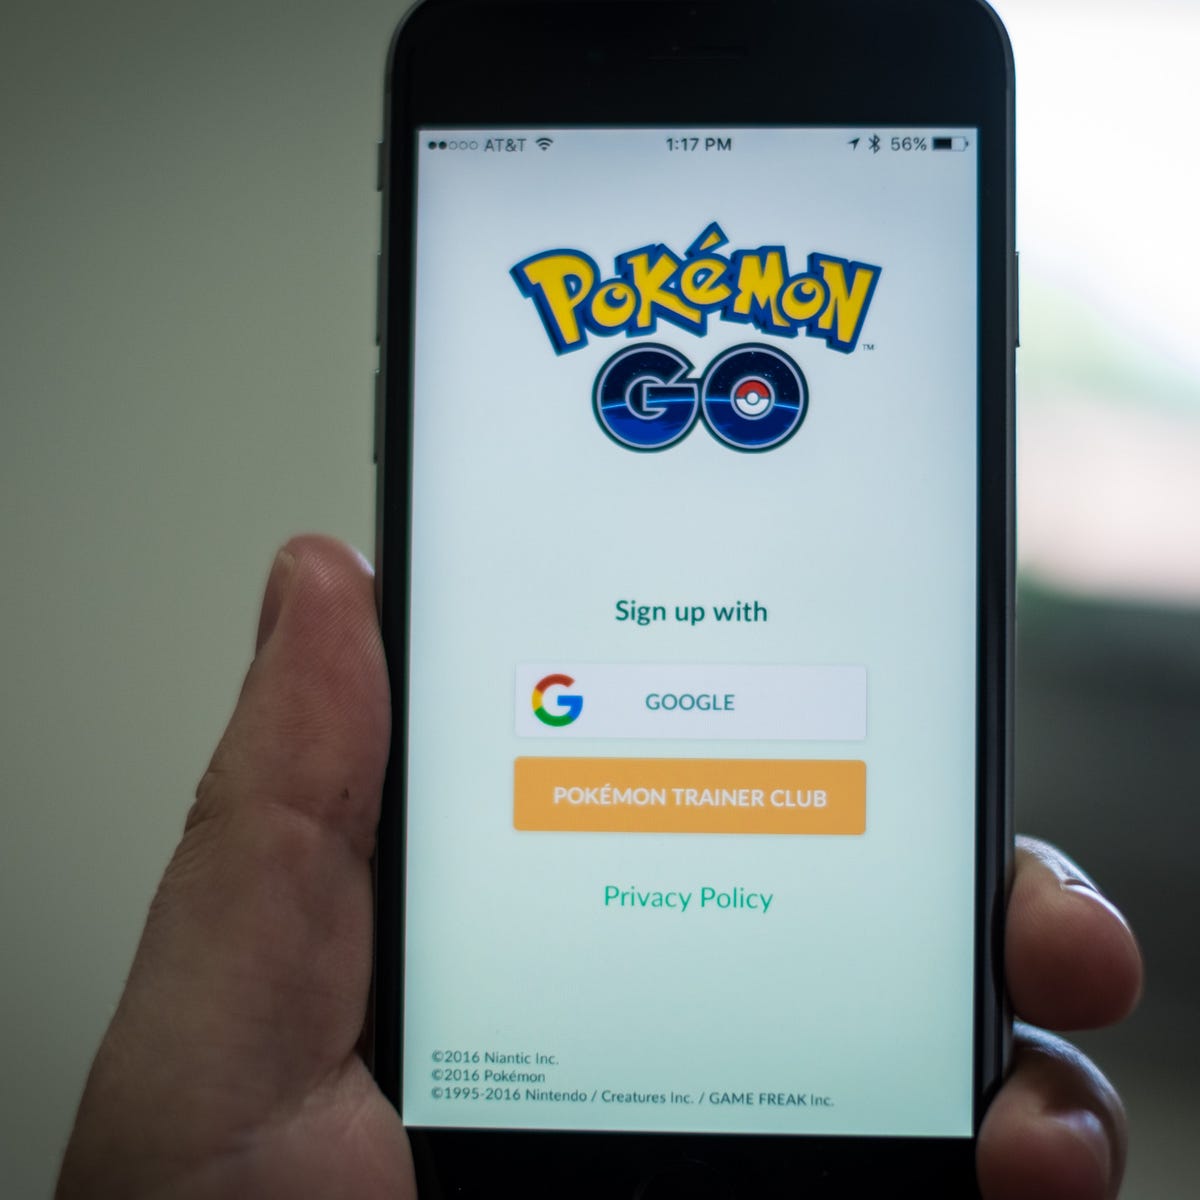 Pokemon Go can see everything in your Google account. Here's how to stop it  - CNET